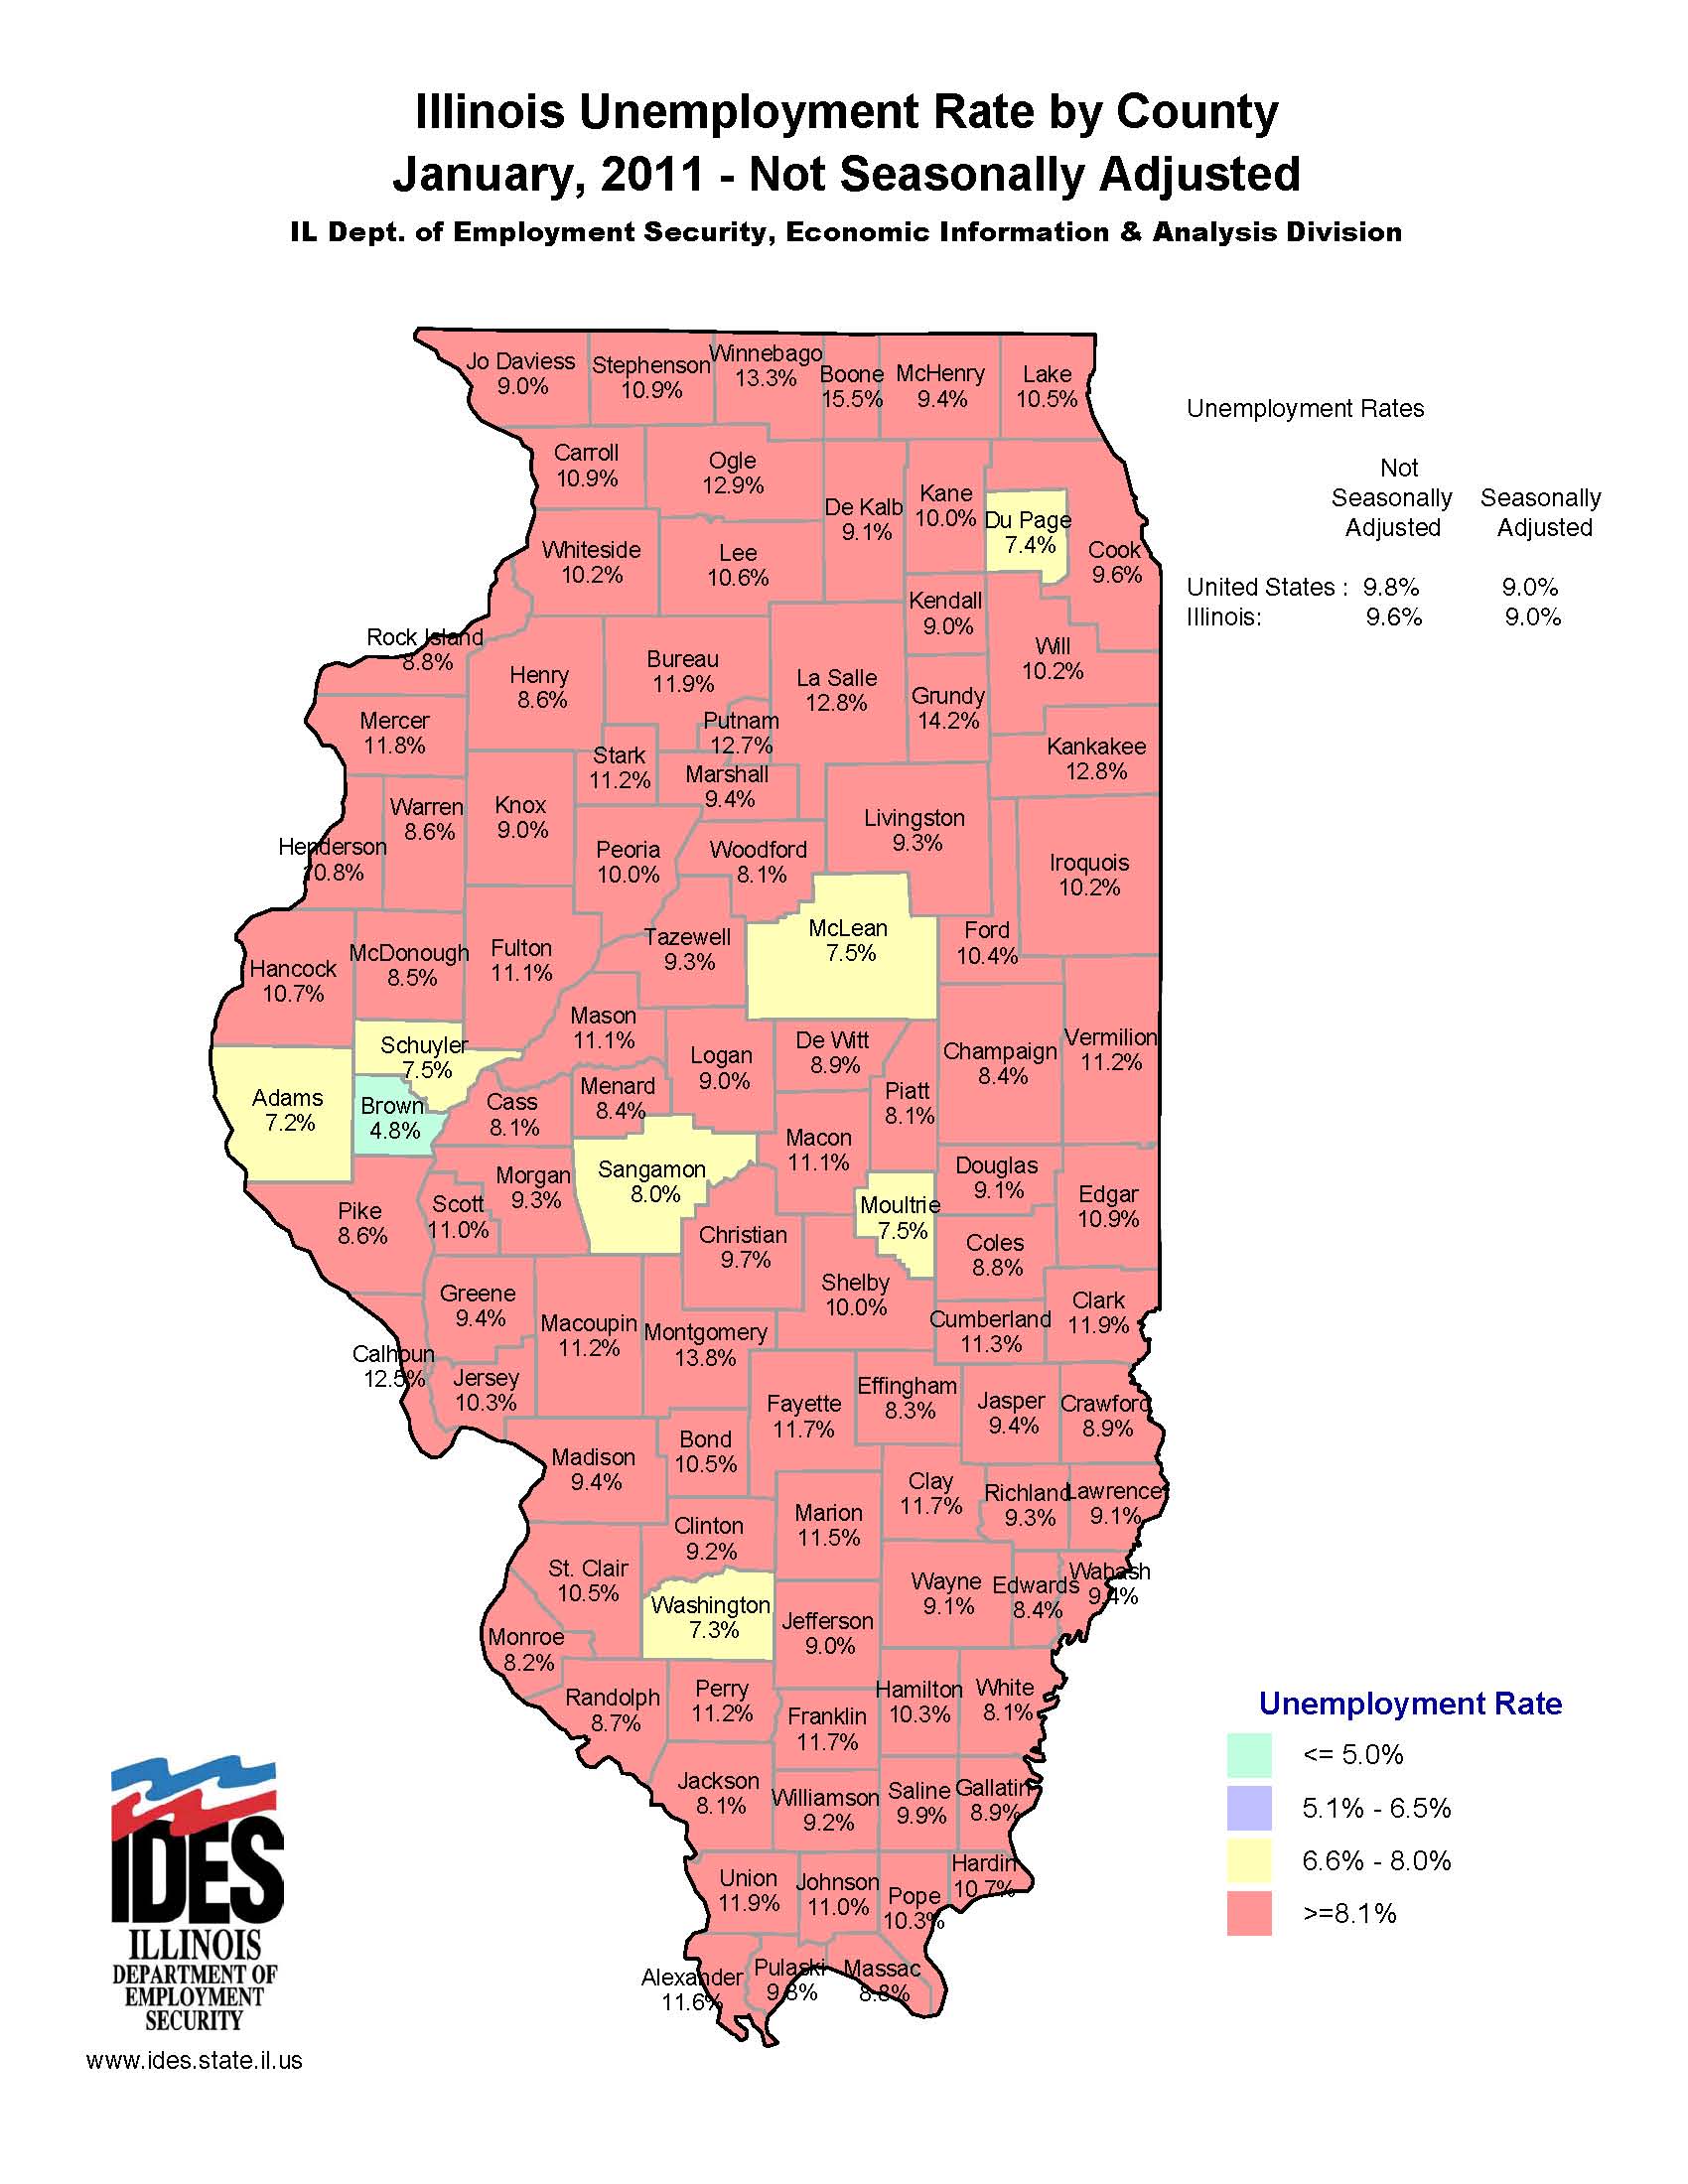 Adams County Ranks 2nd for Lowest Unemployment in Illinois